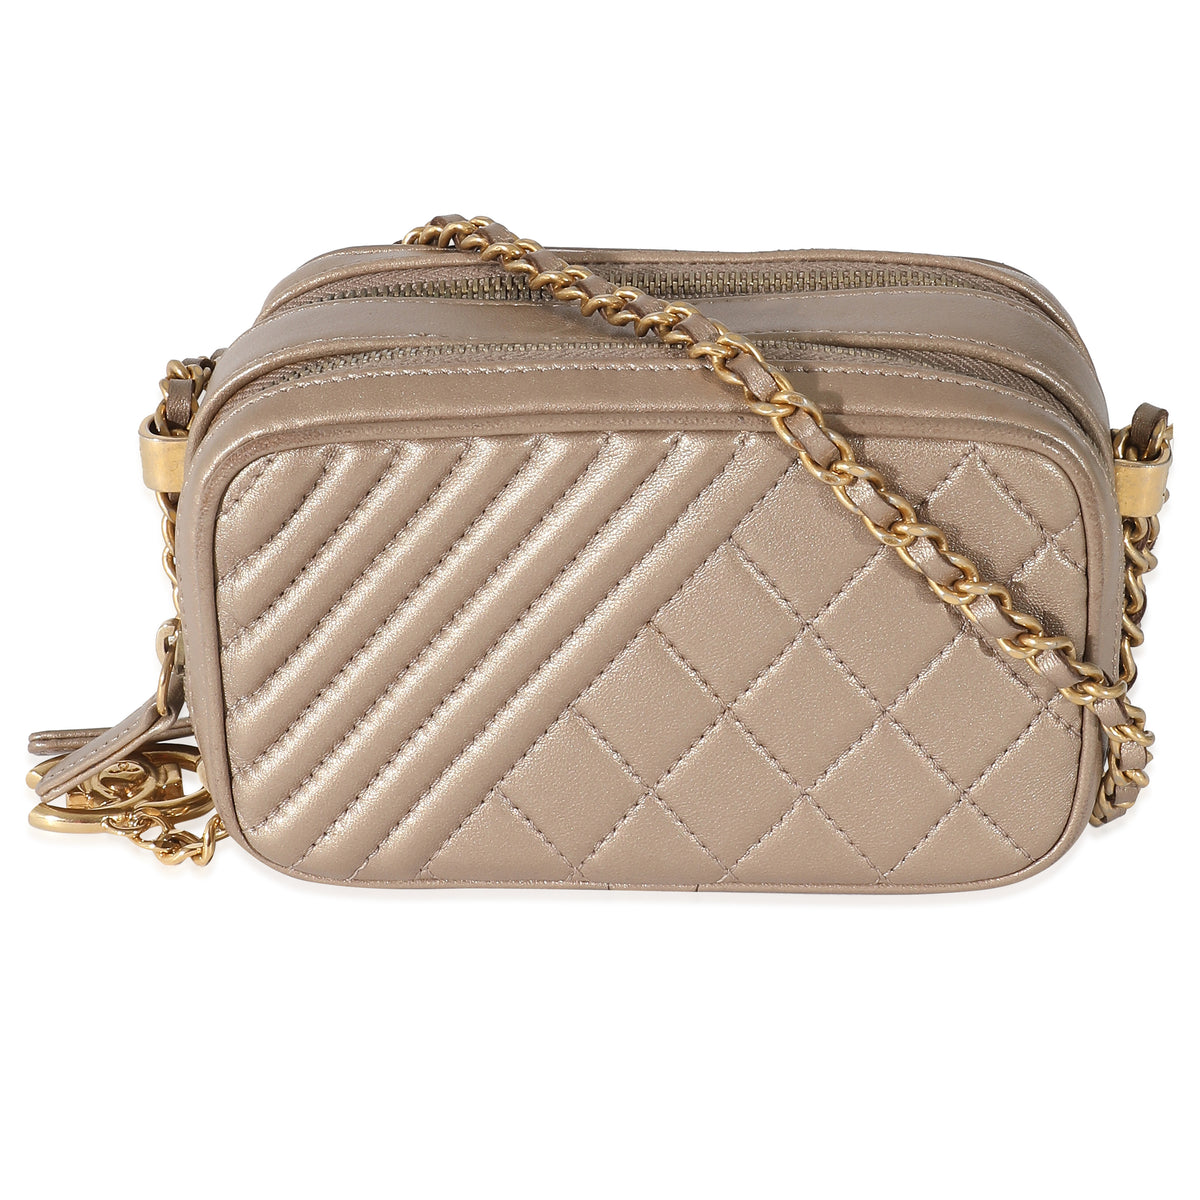 Chanel Metallic Dark Beige Quilted Leather Small Coco Boy Camera Case  Shoulder Bag Chanel